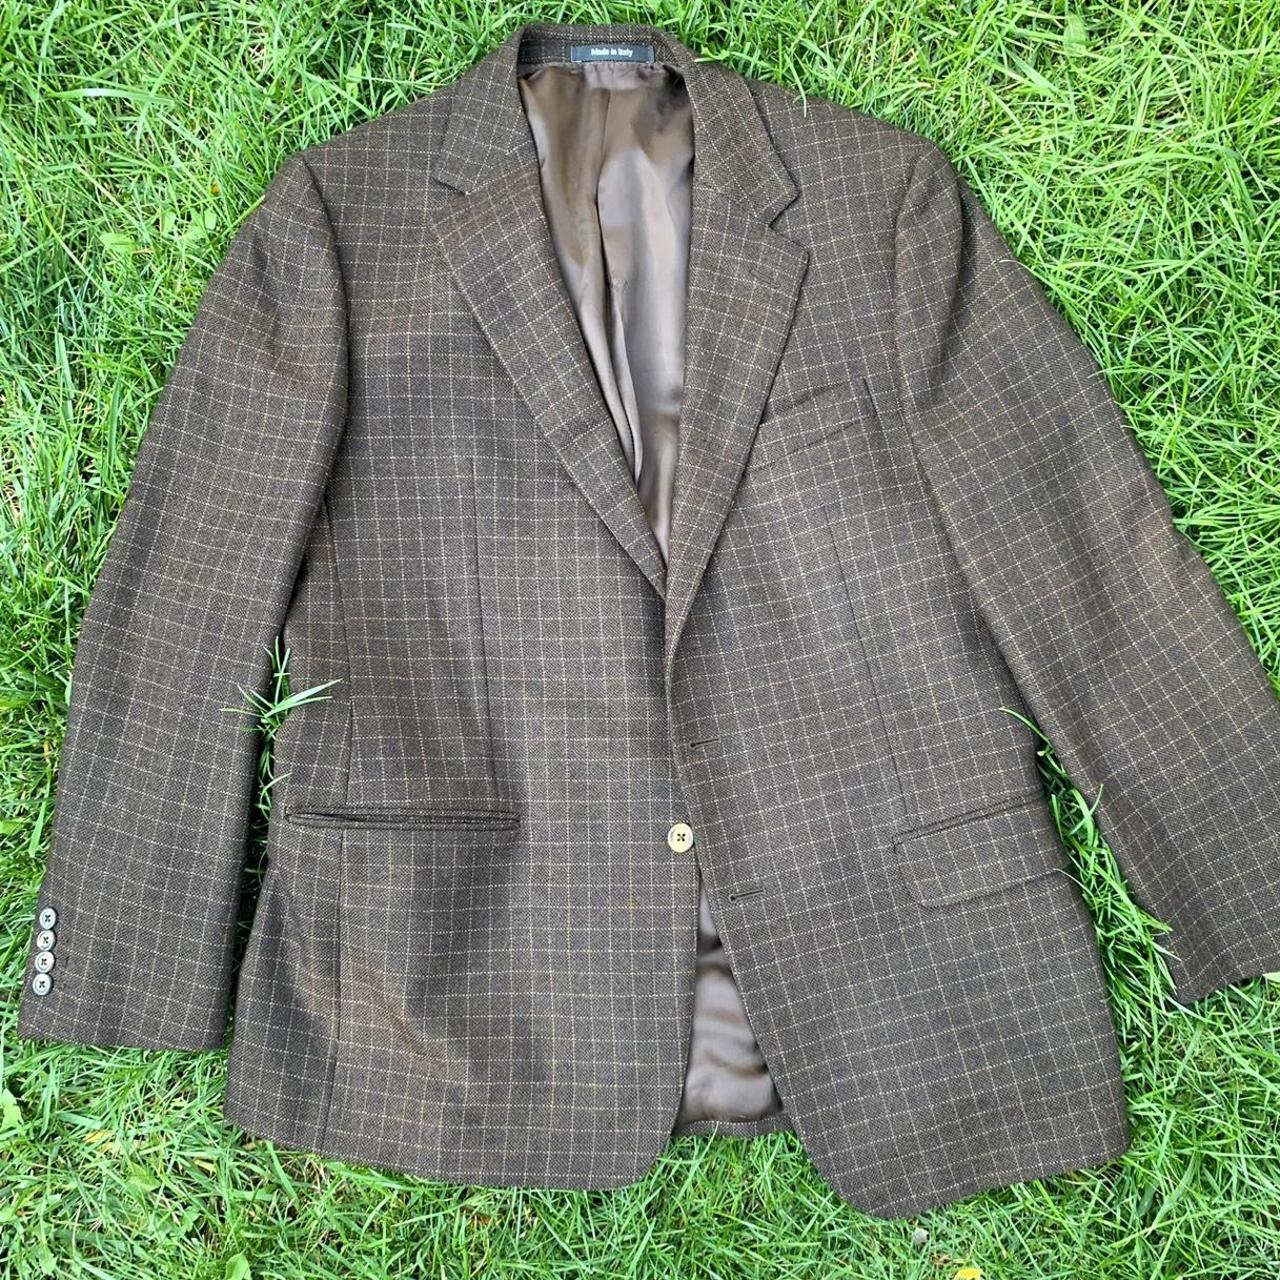 Dunhill Men's Brown and Tan Jacket